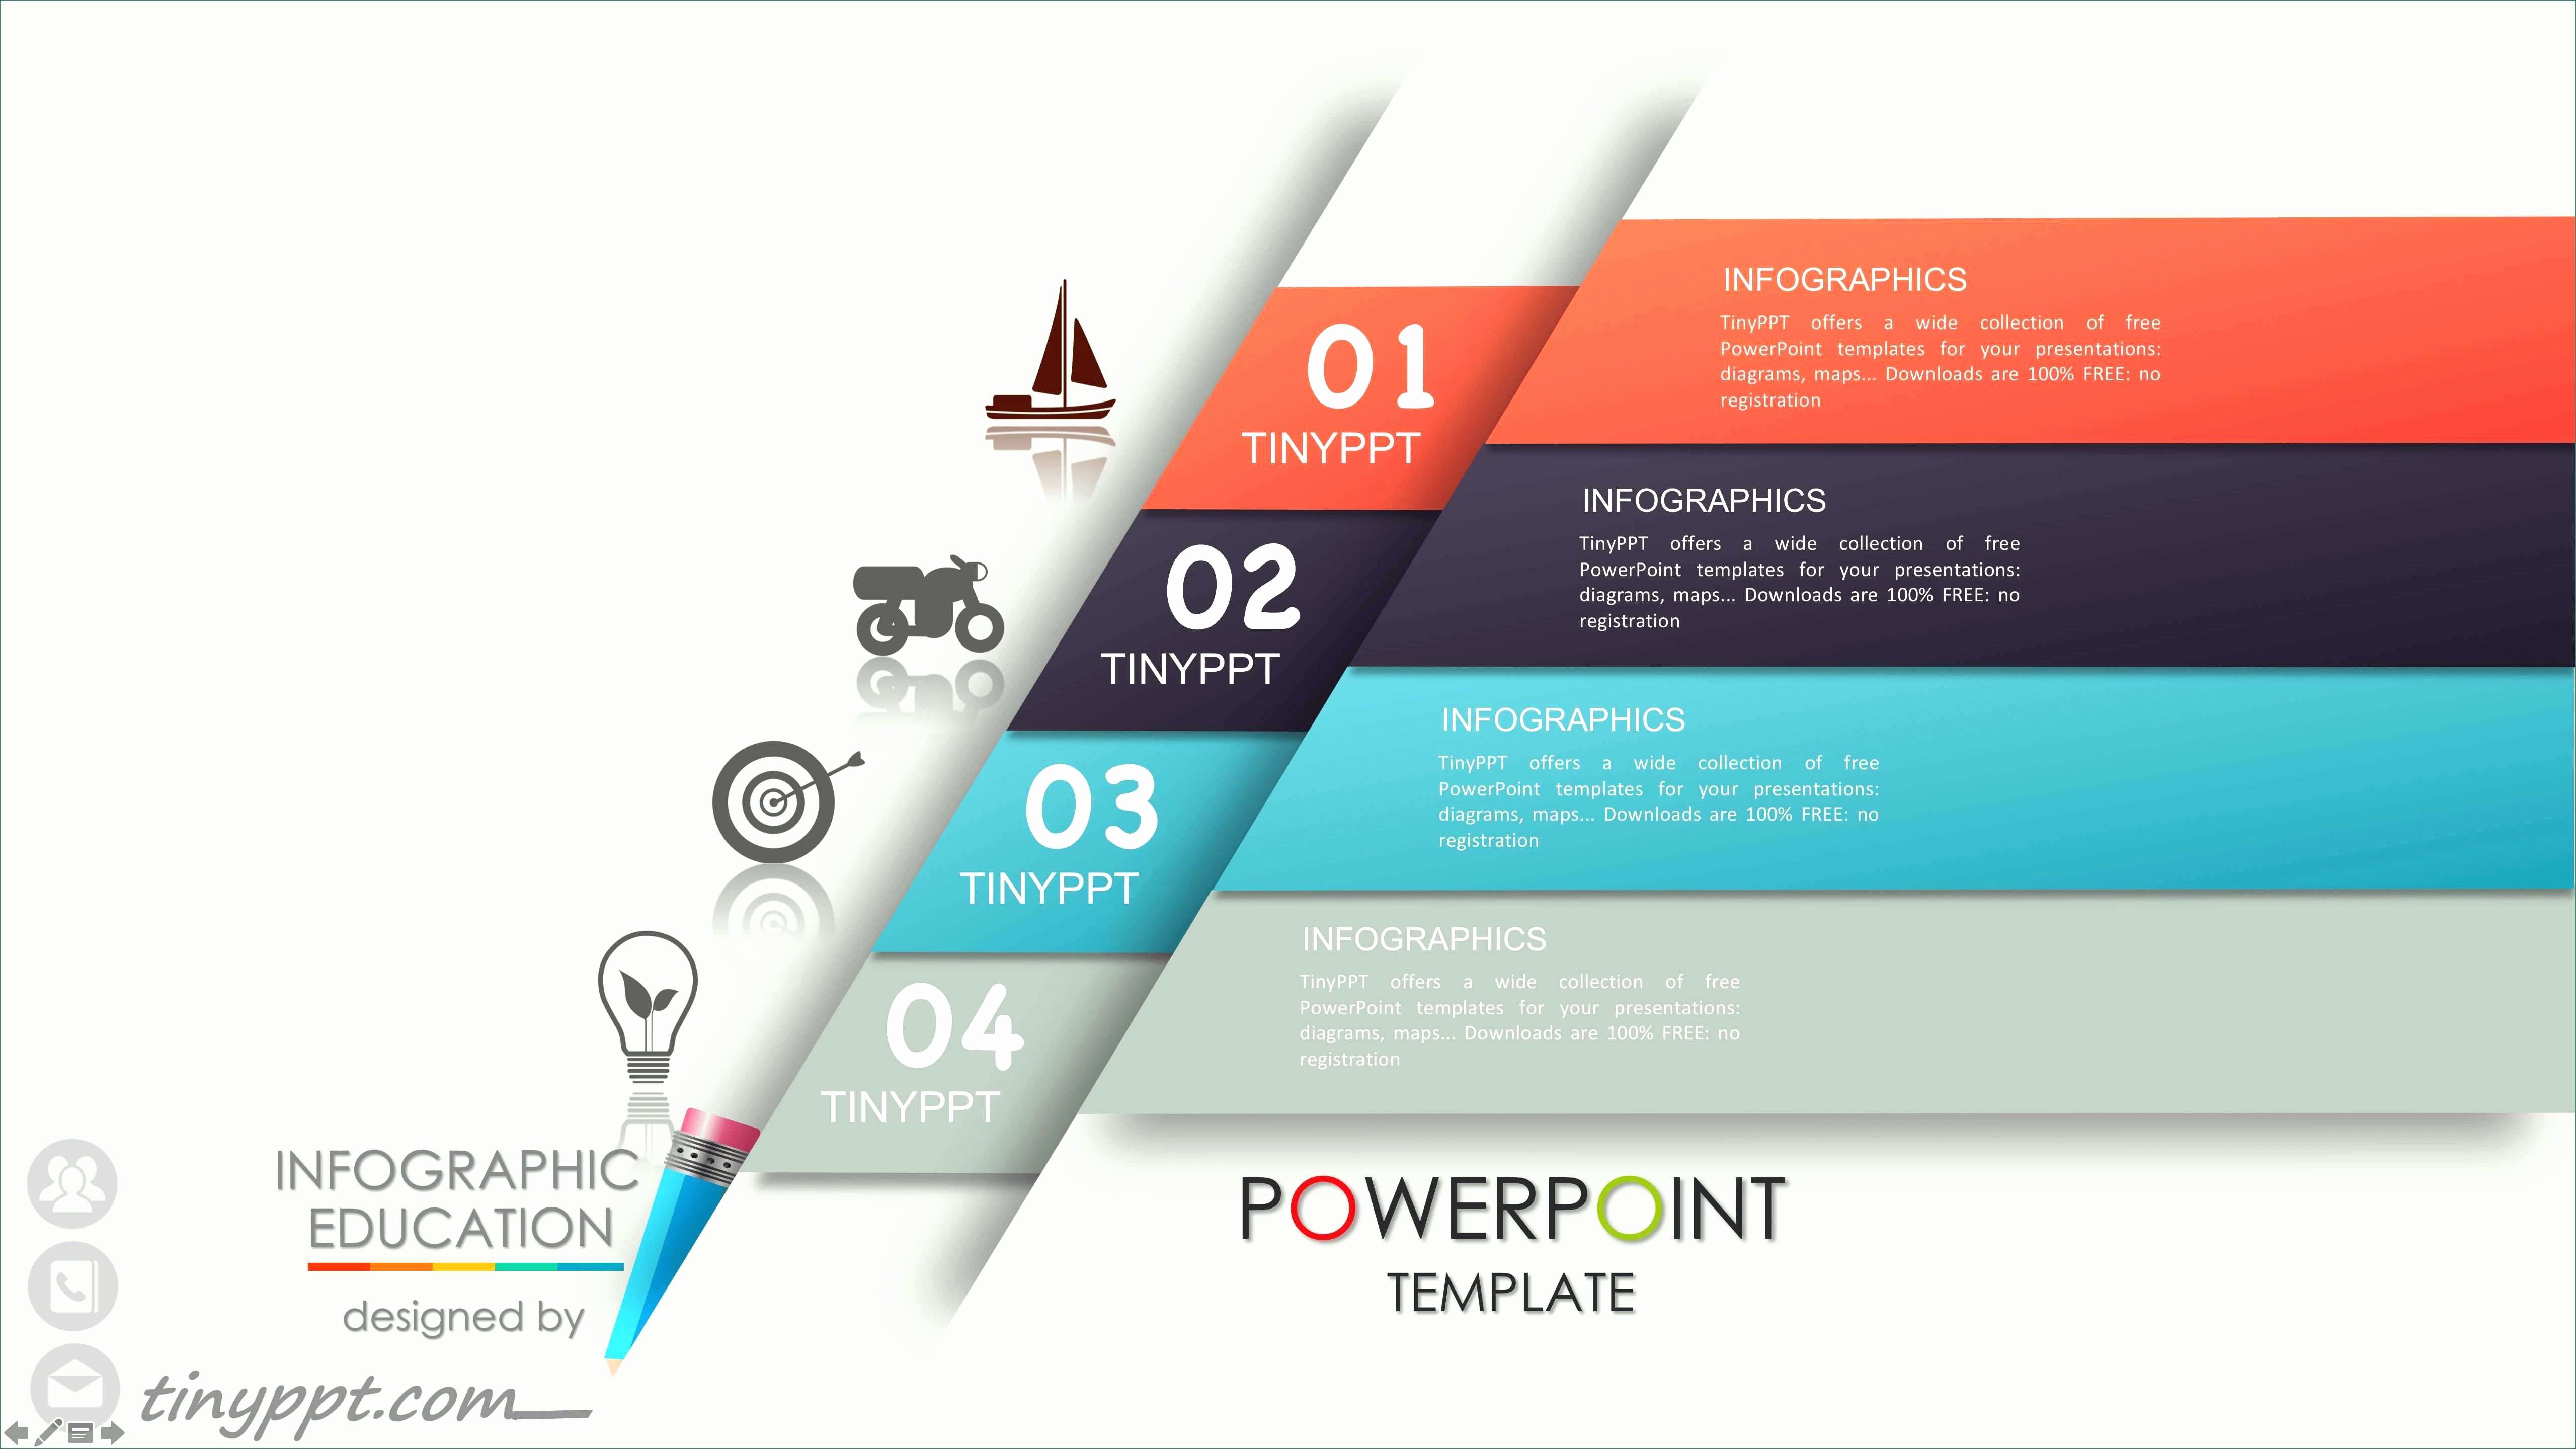 Powerpoint torrent Quoet Free after Effects Text Templates